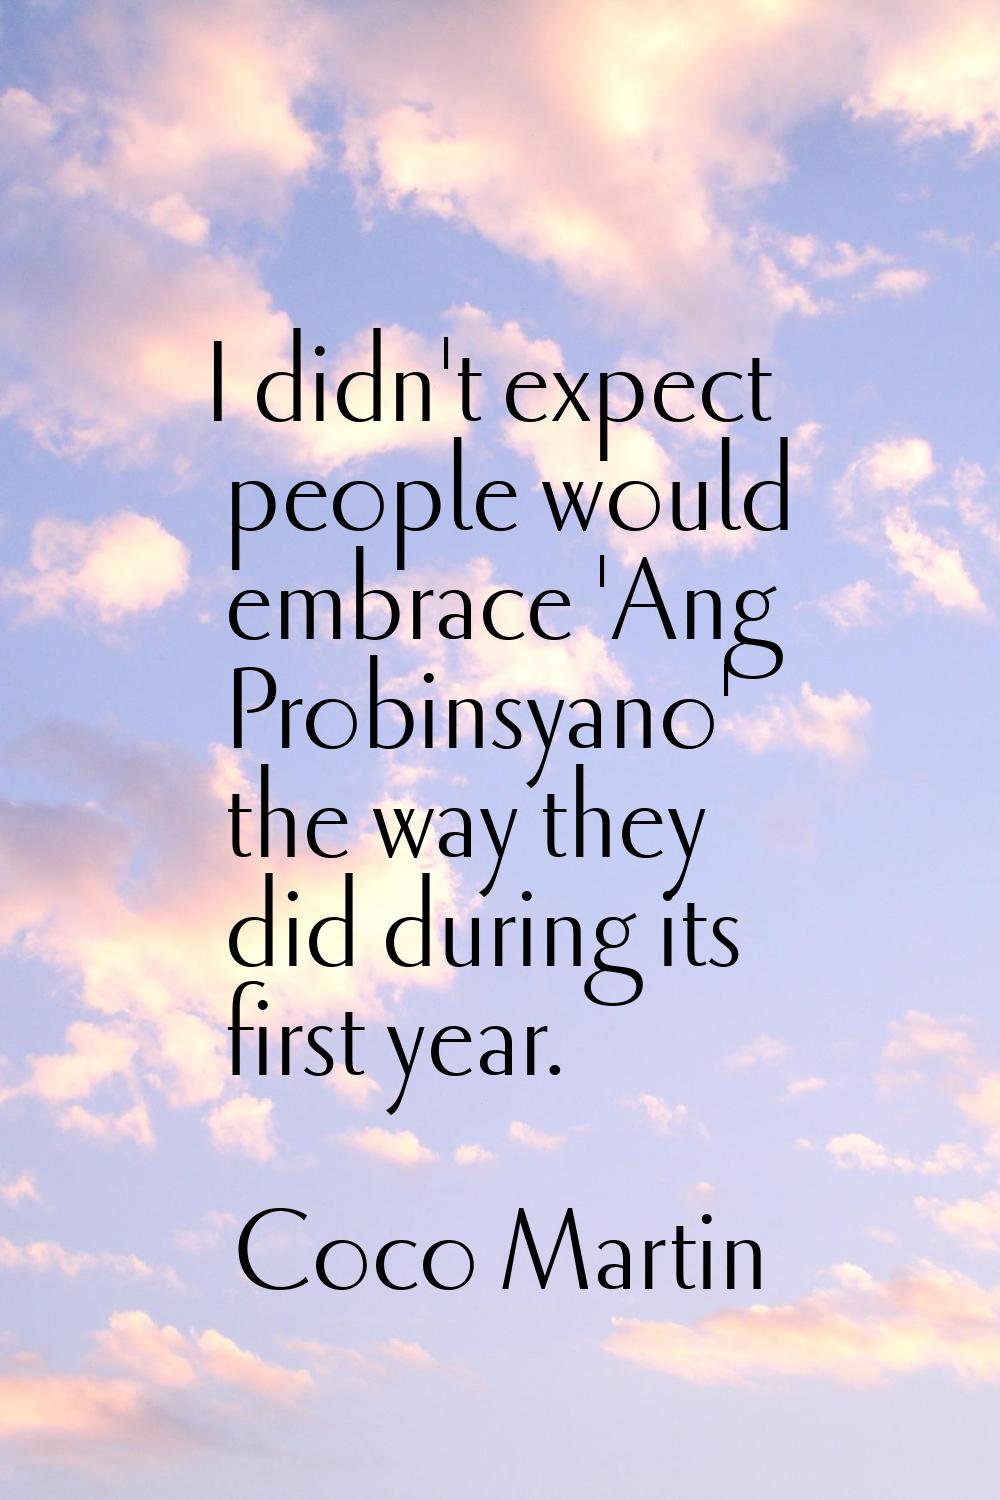 I didn't expect people would embrace 'Ang Probinsyano' the way they did during its first year.